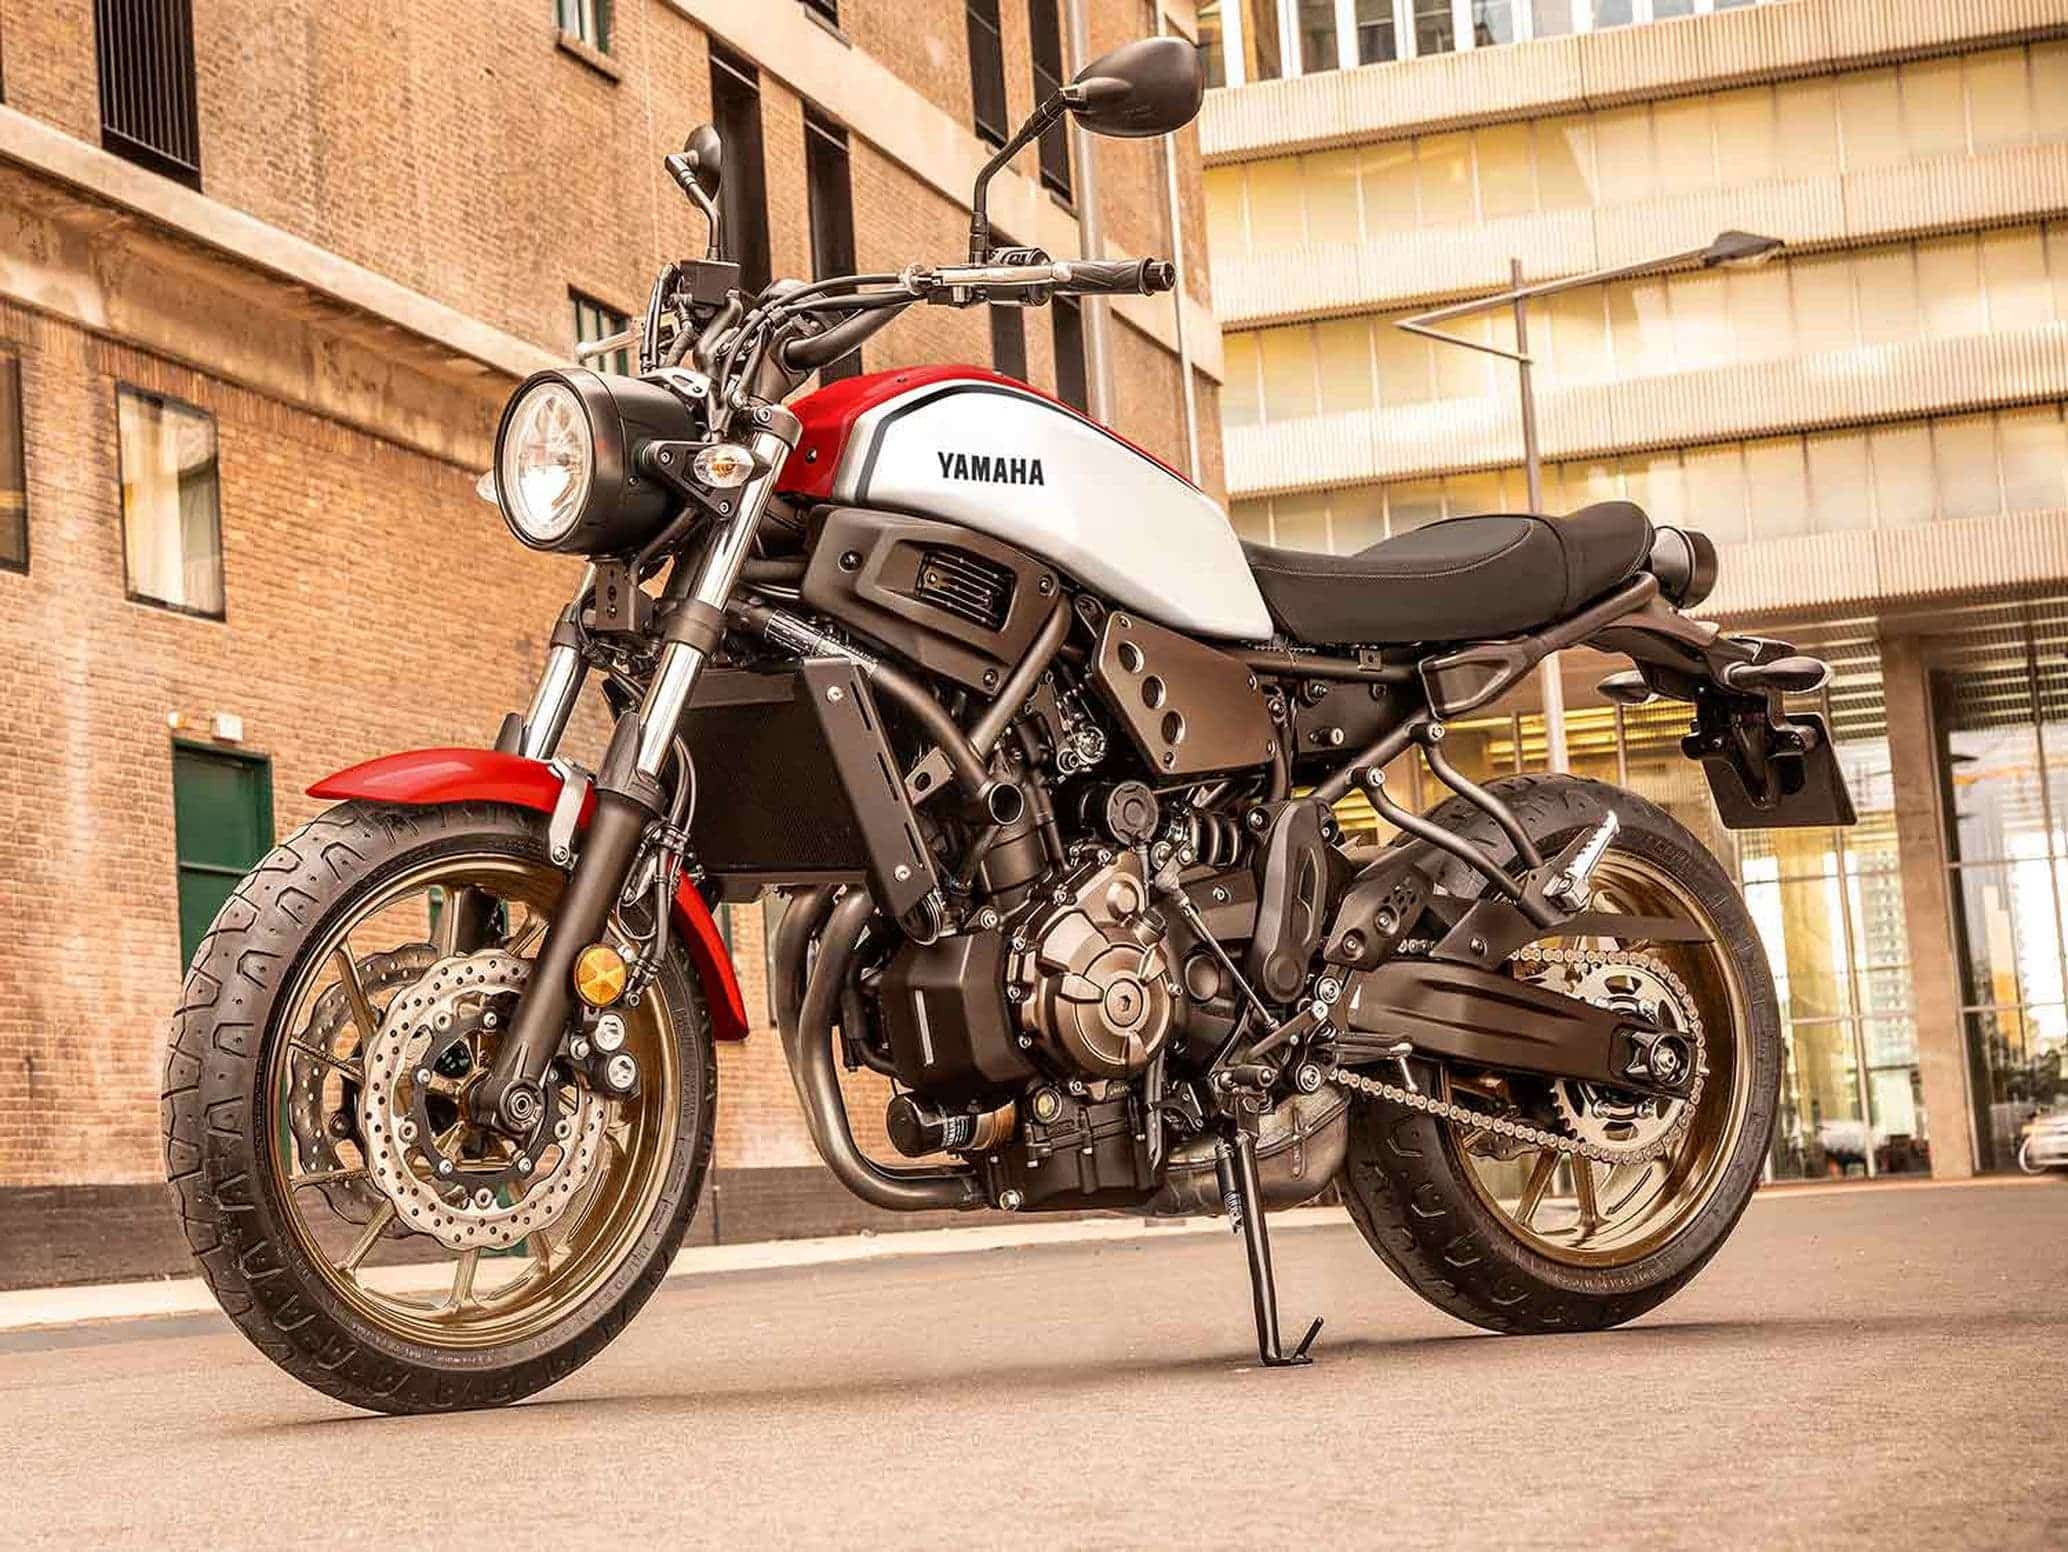 Yamaha XSR900 in industrial area, vintage style photo